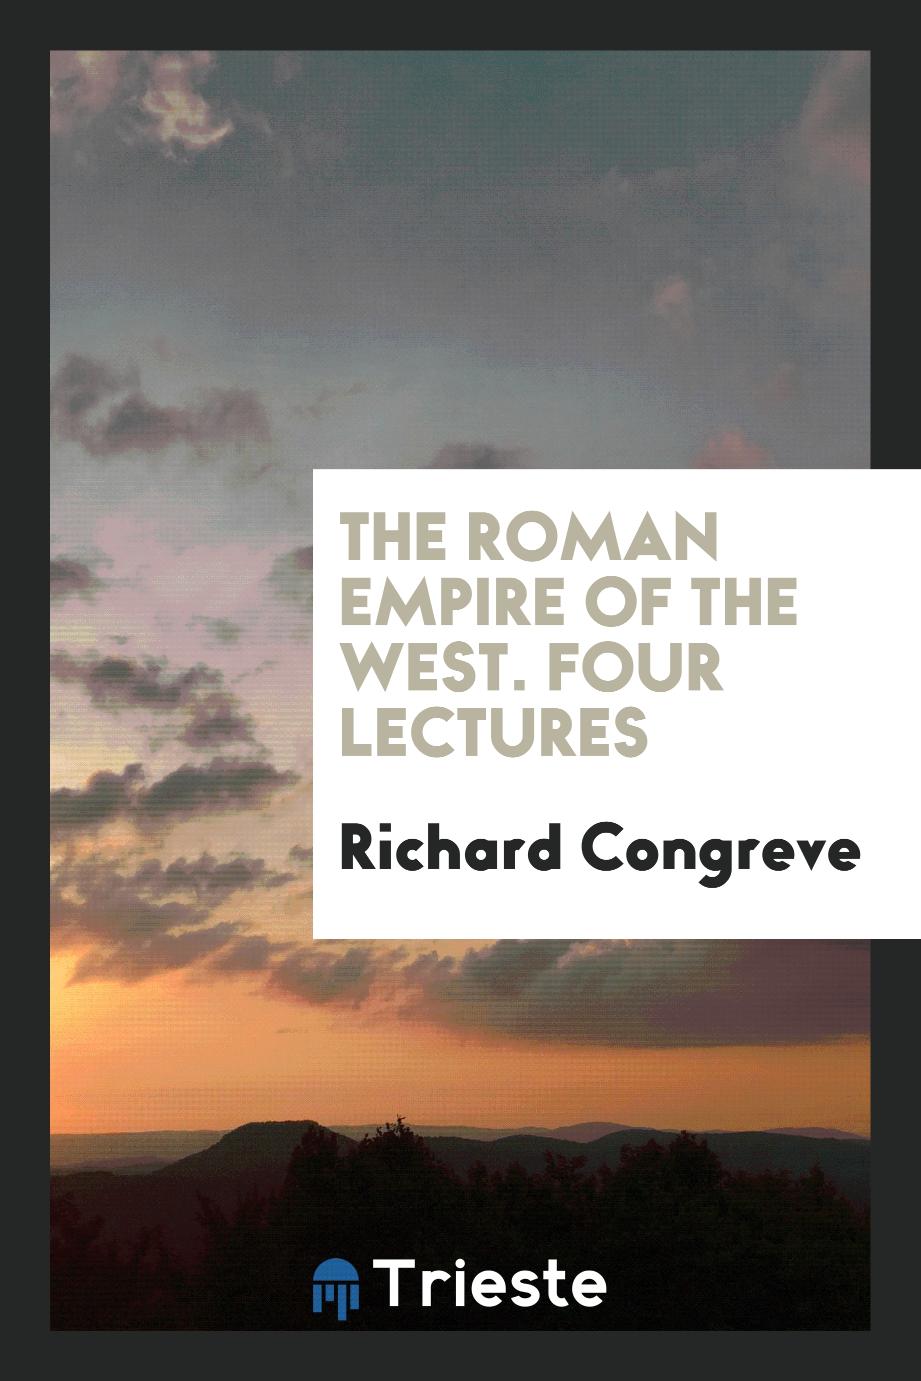 The Roman Empire of the West. Four Lectures